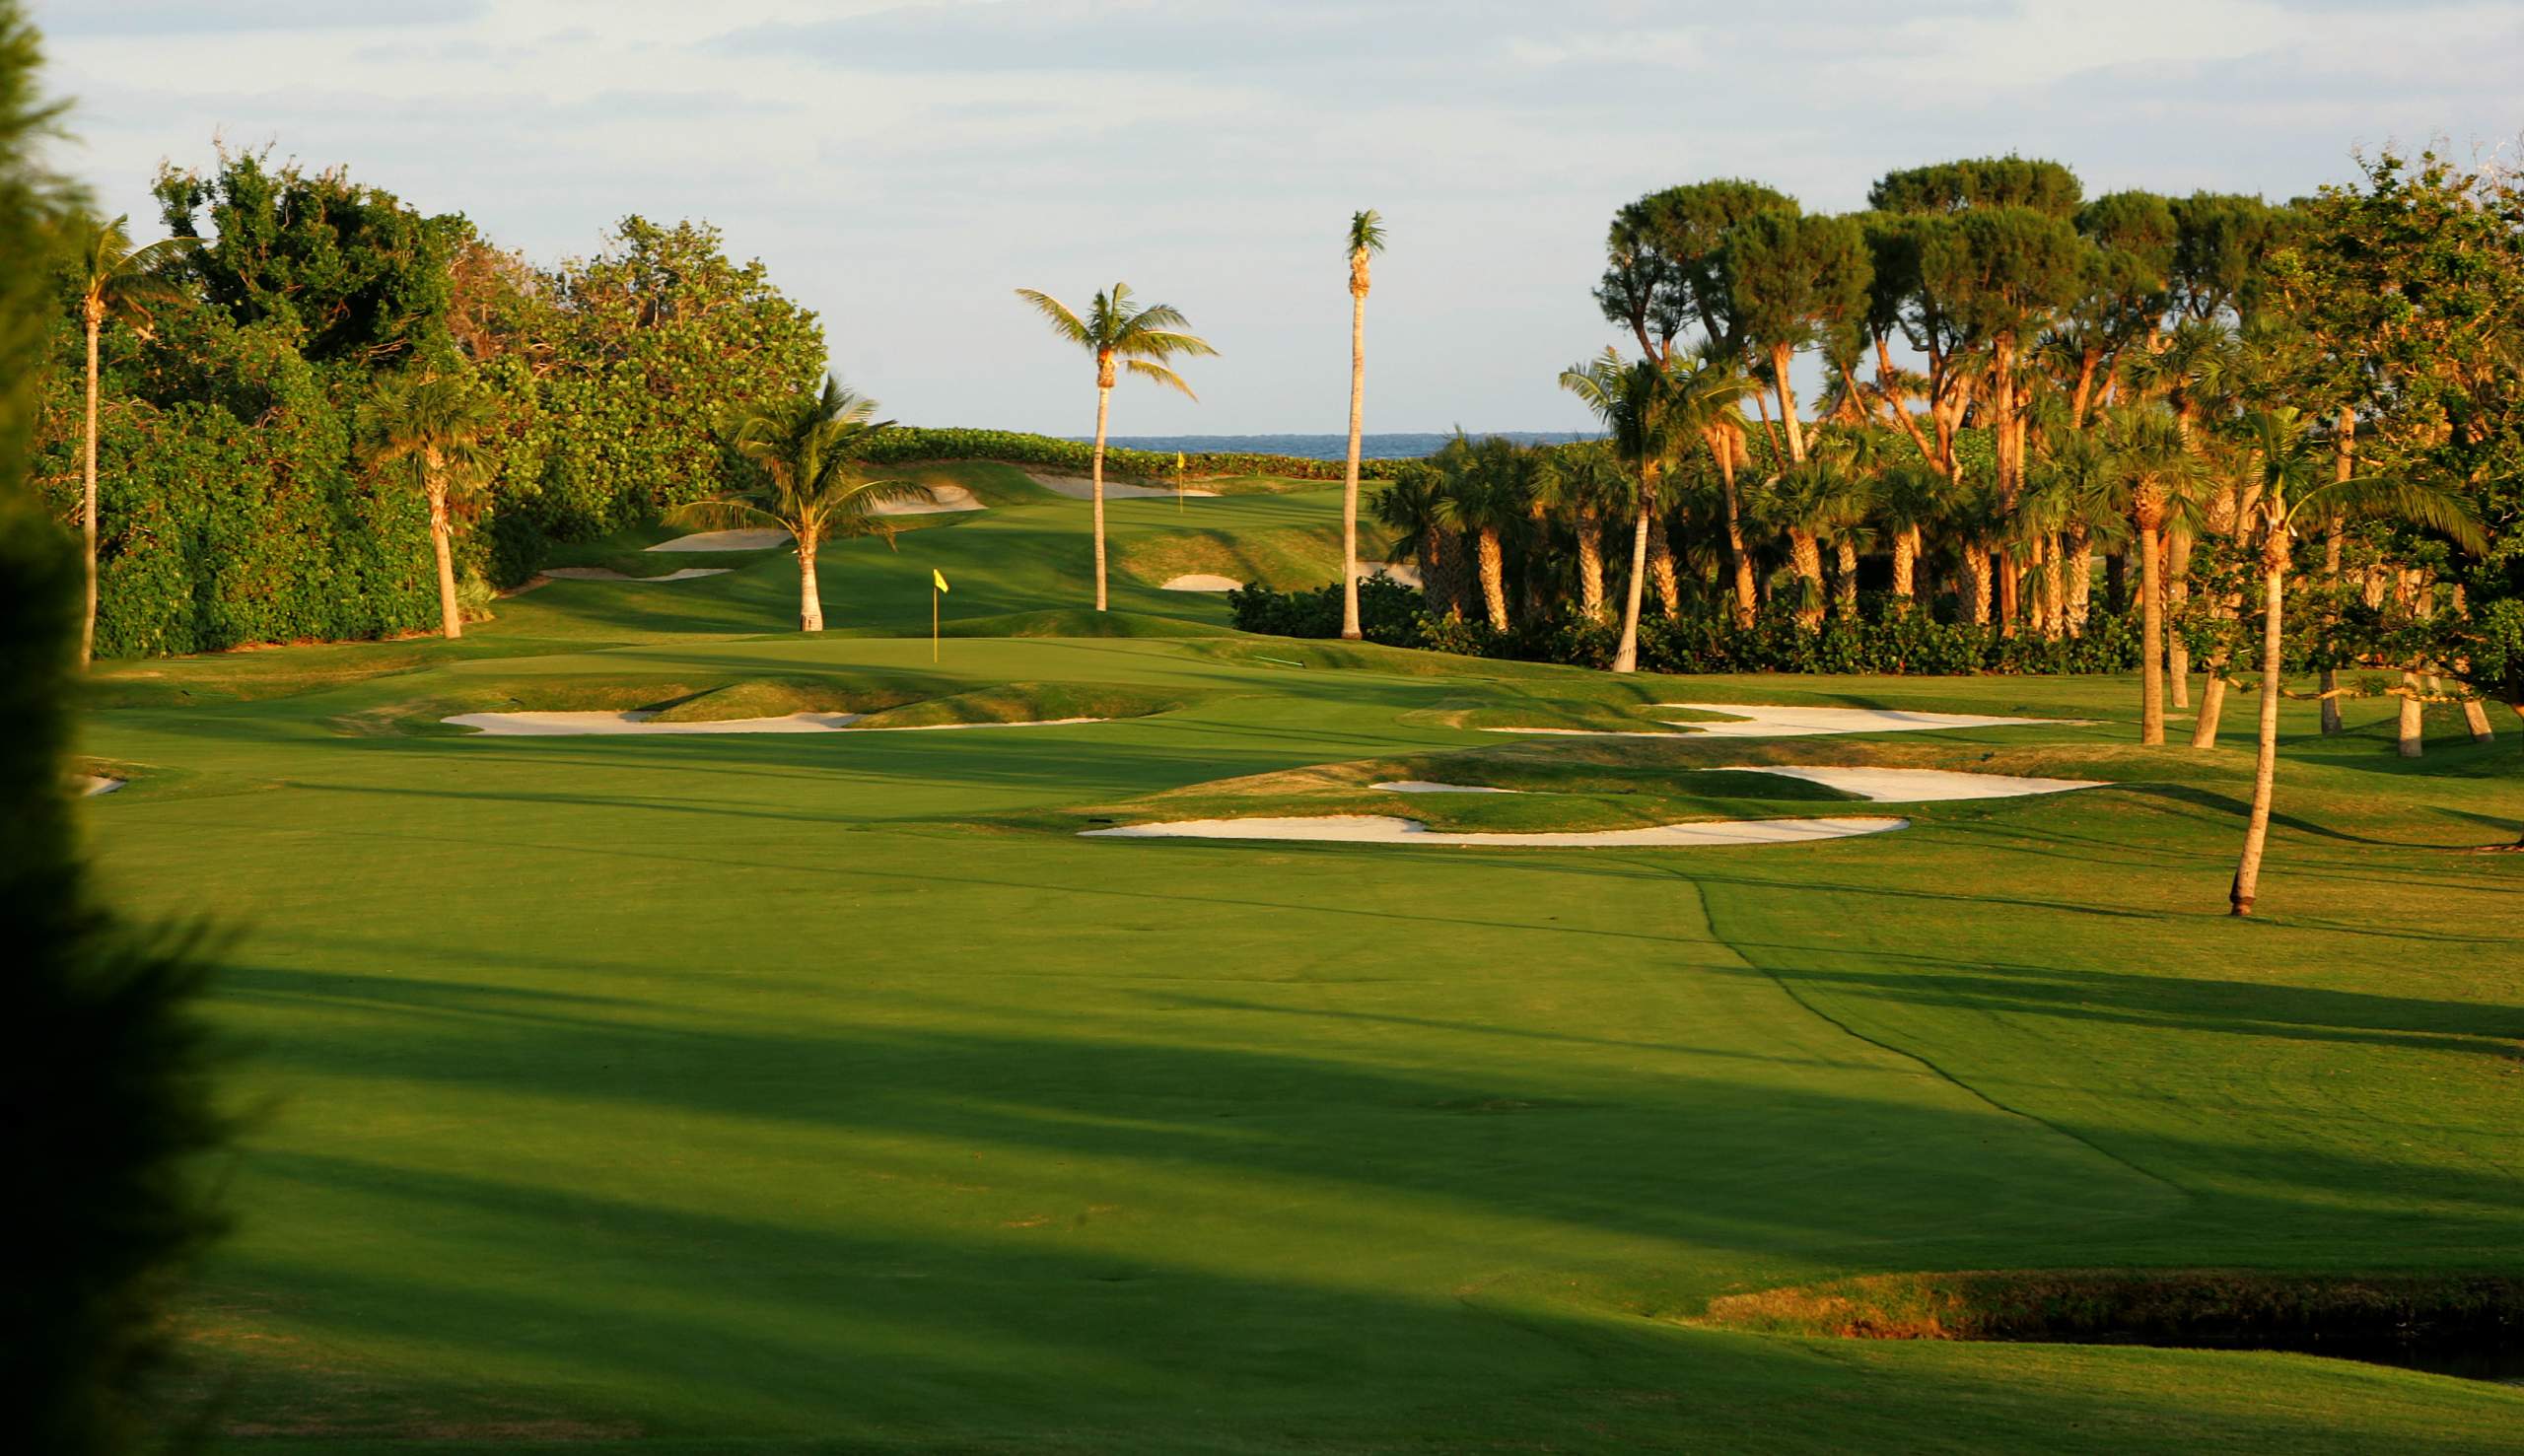 <em><b>Course Location: Juno Beach, Florida </b></em> Built in 1929, the Seminole Golf Club has long been a popular destination. Over the years, the club has hosted several high-profile members -- including Henry Ford II, Jack Chrysler, Joseph P. Kennedy, and John Pillsbury. Additionally, Presidents John F. Kennedy and Gerald Ford frequented the course. The course itself is known to be firm, but that can sometimes become an issue when the wind comes in off the ocean. If the breeze catches the ball just right, it may run far past your desired landing spot.